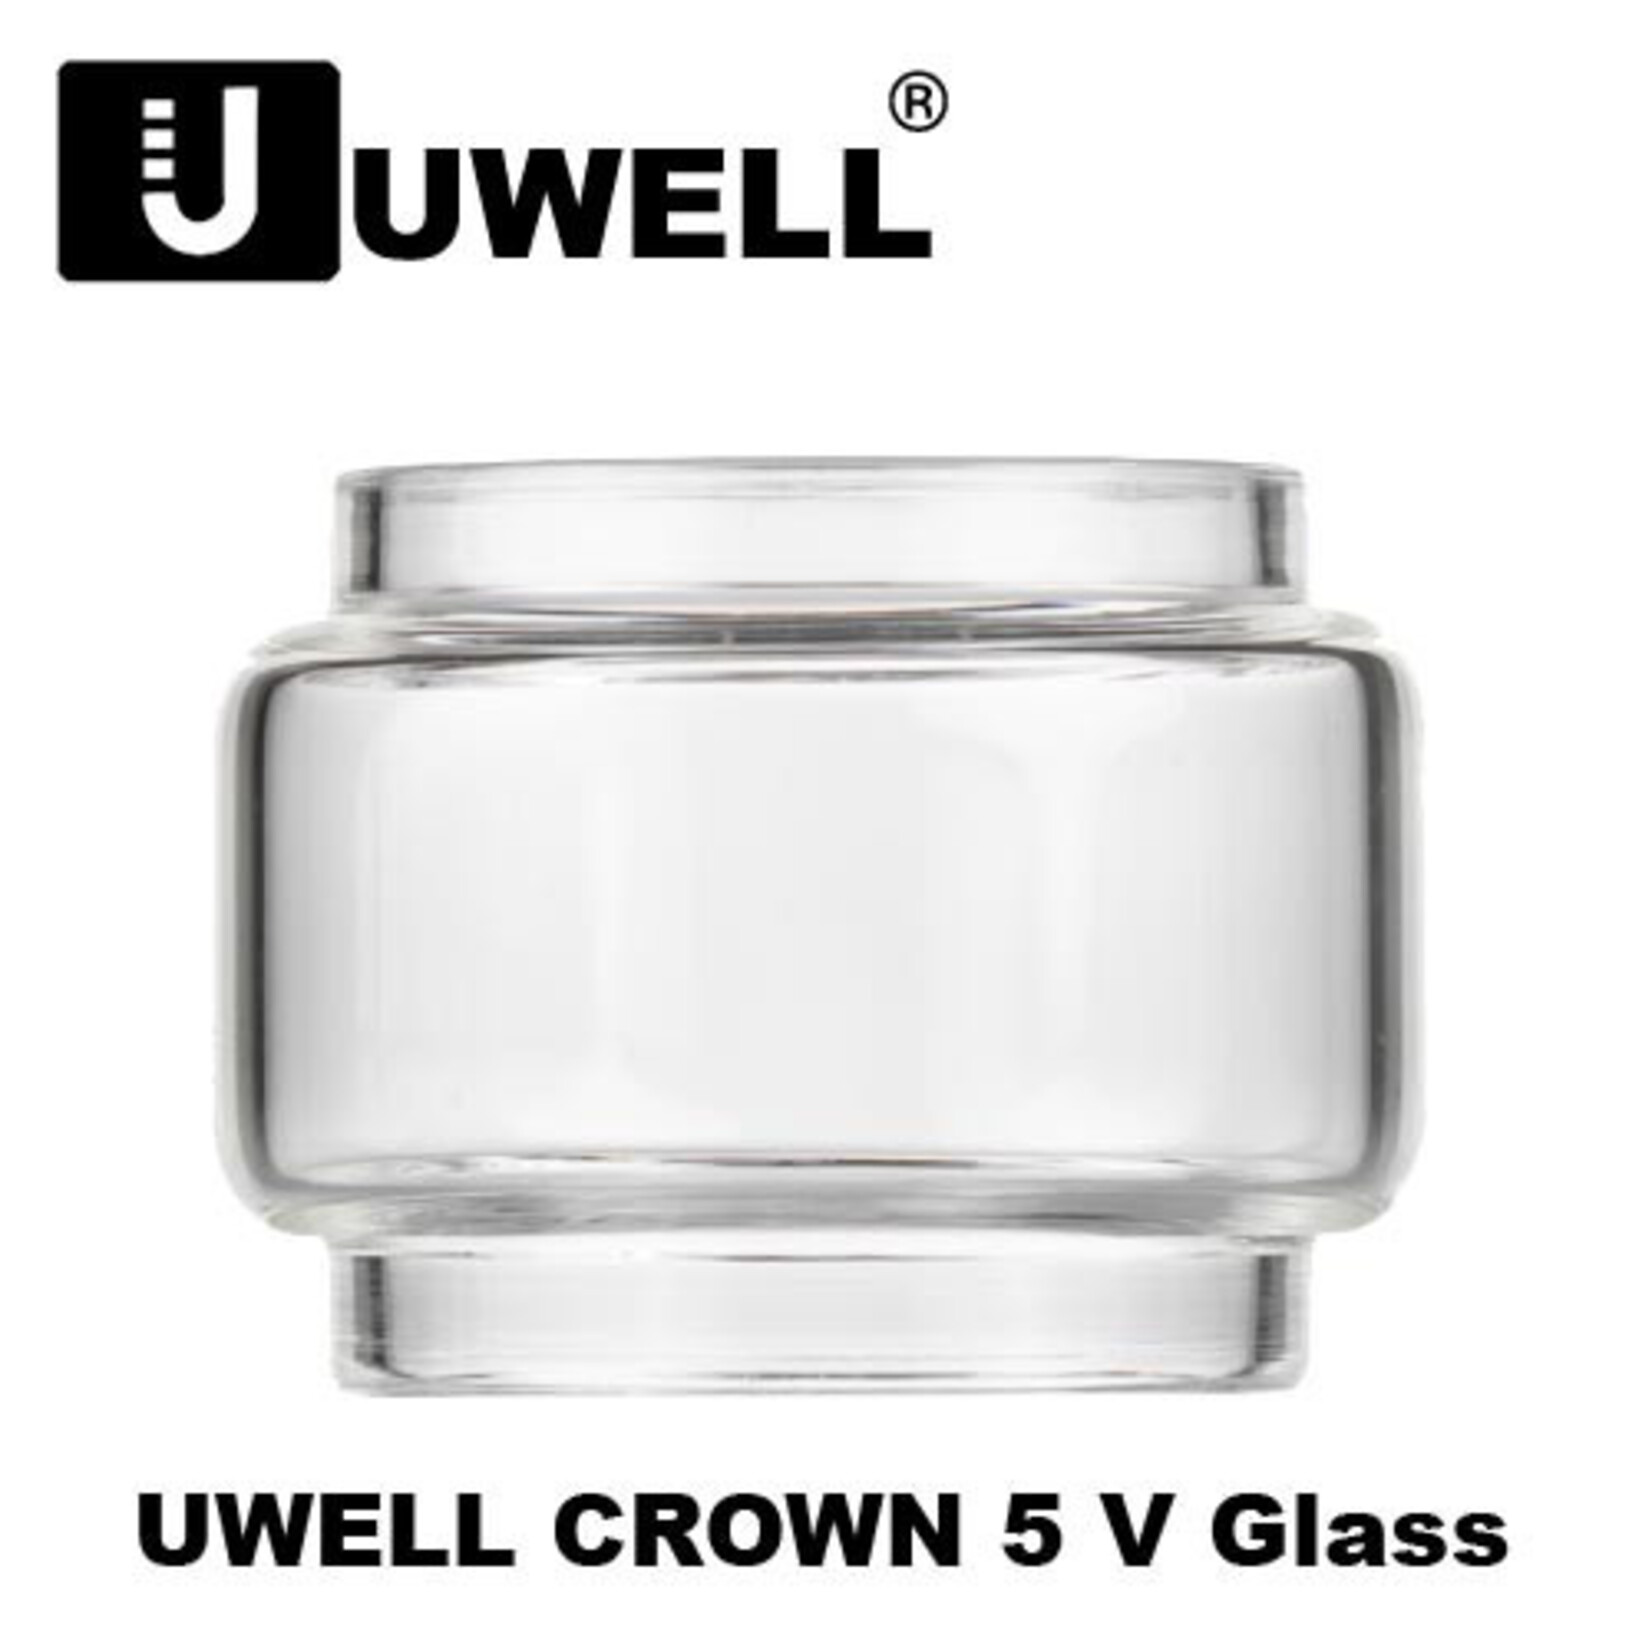 Uwell Crown 5 replacement glass